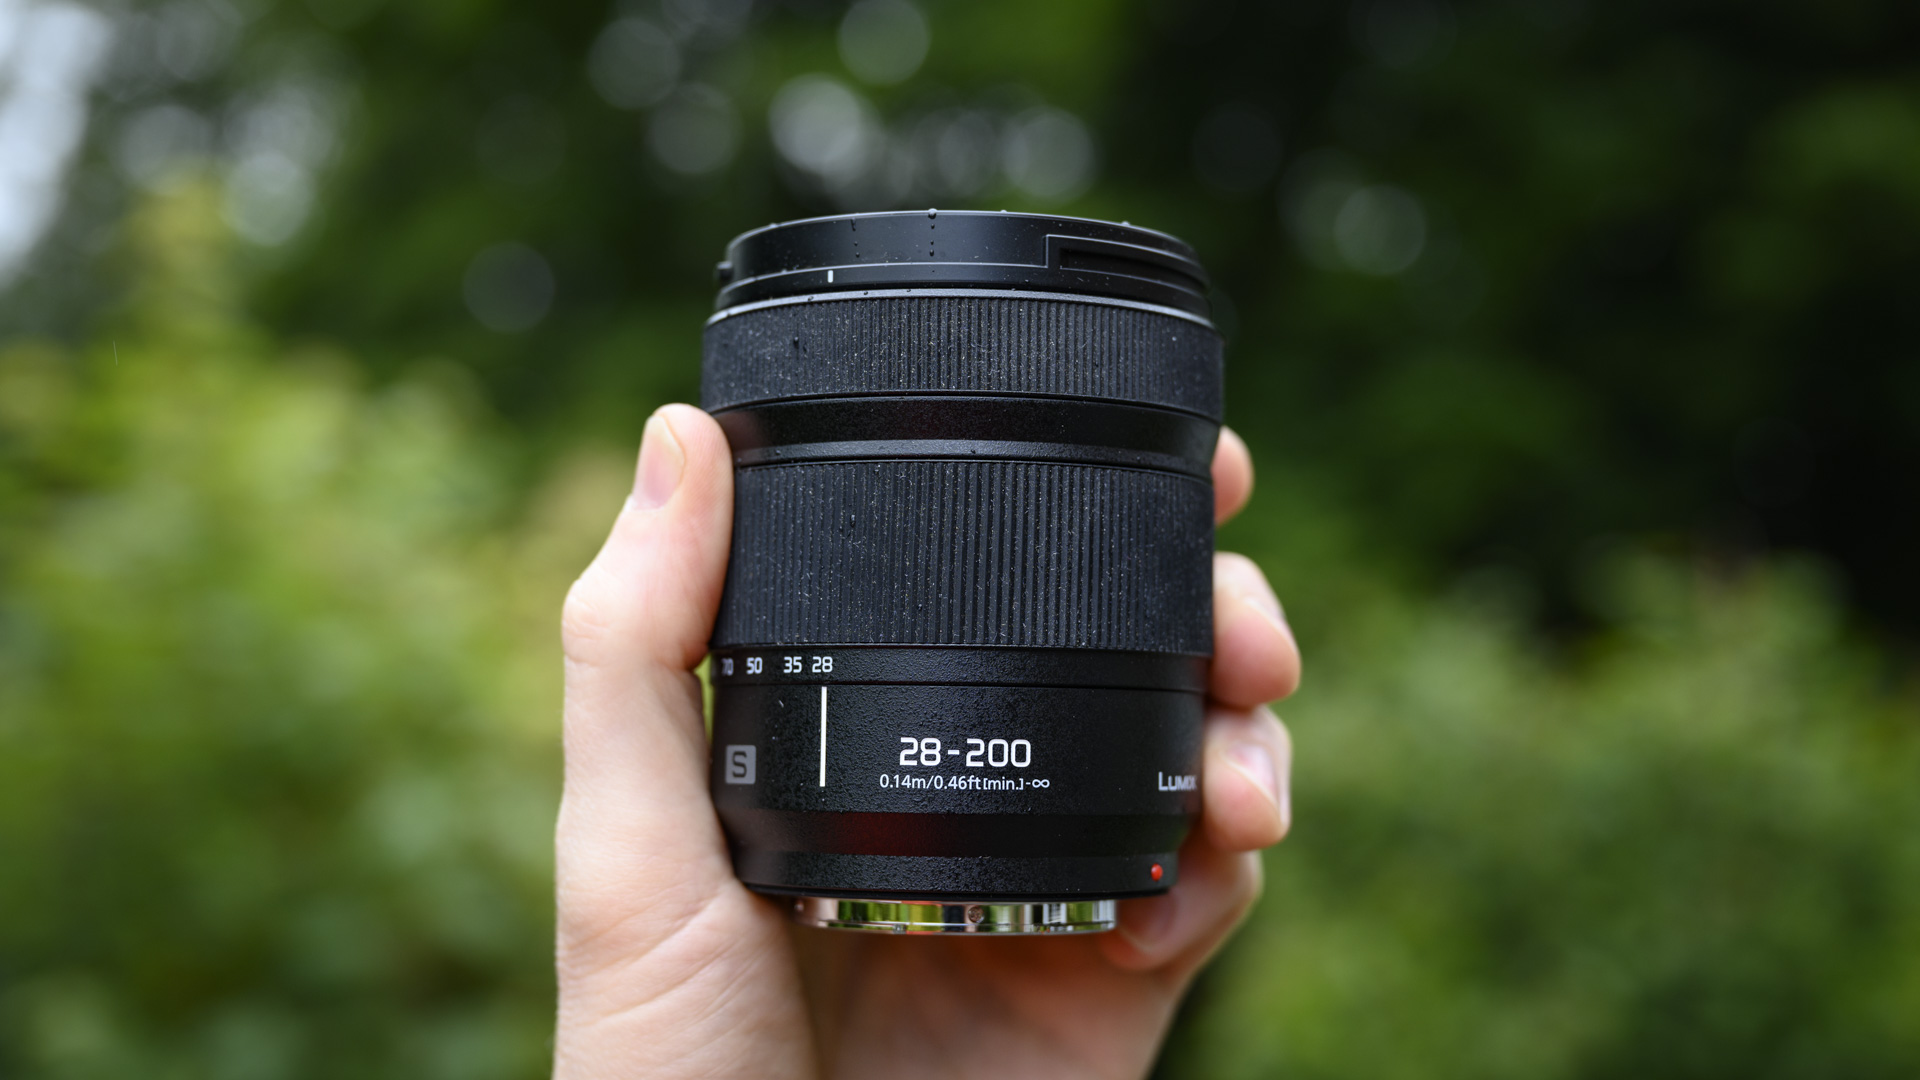 Panasonic Lumix S 28-200mm F4-7.1 Macro OIS review: the travel lens that puts the "super" in super-zoom